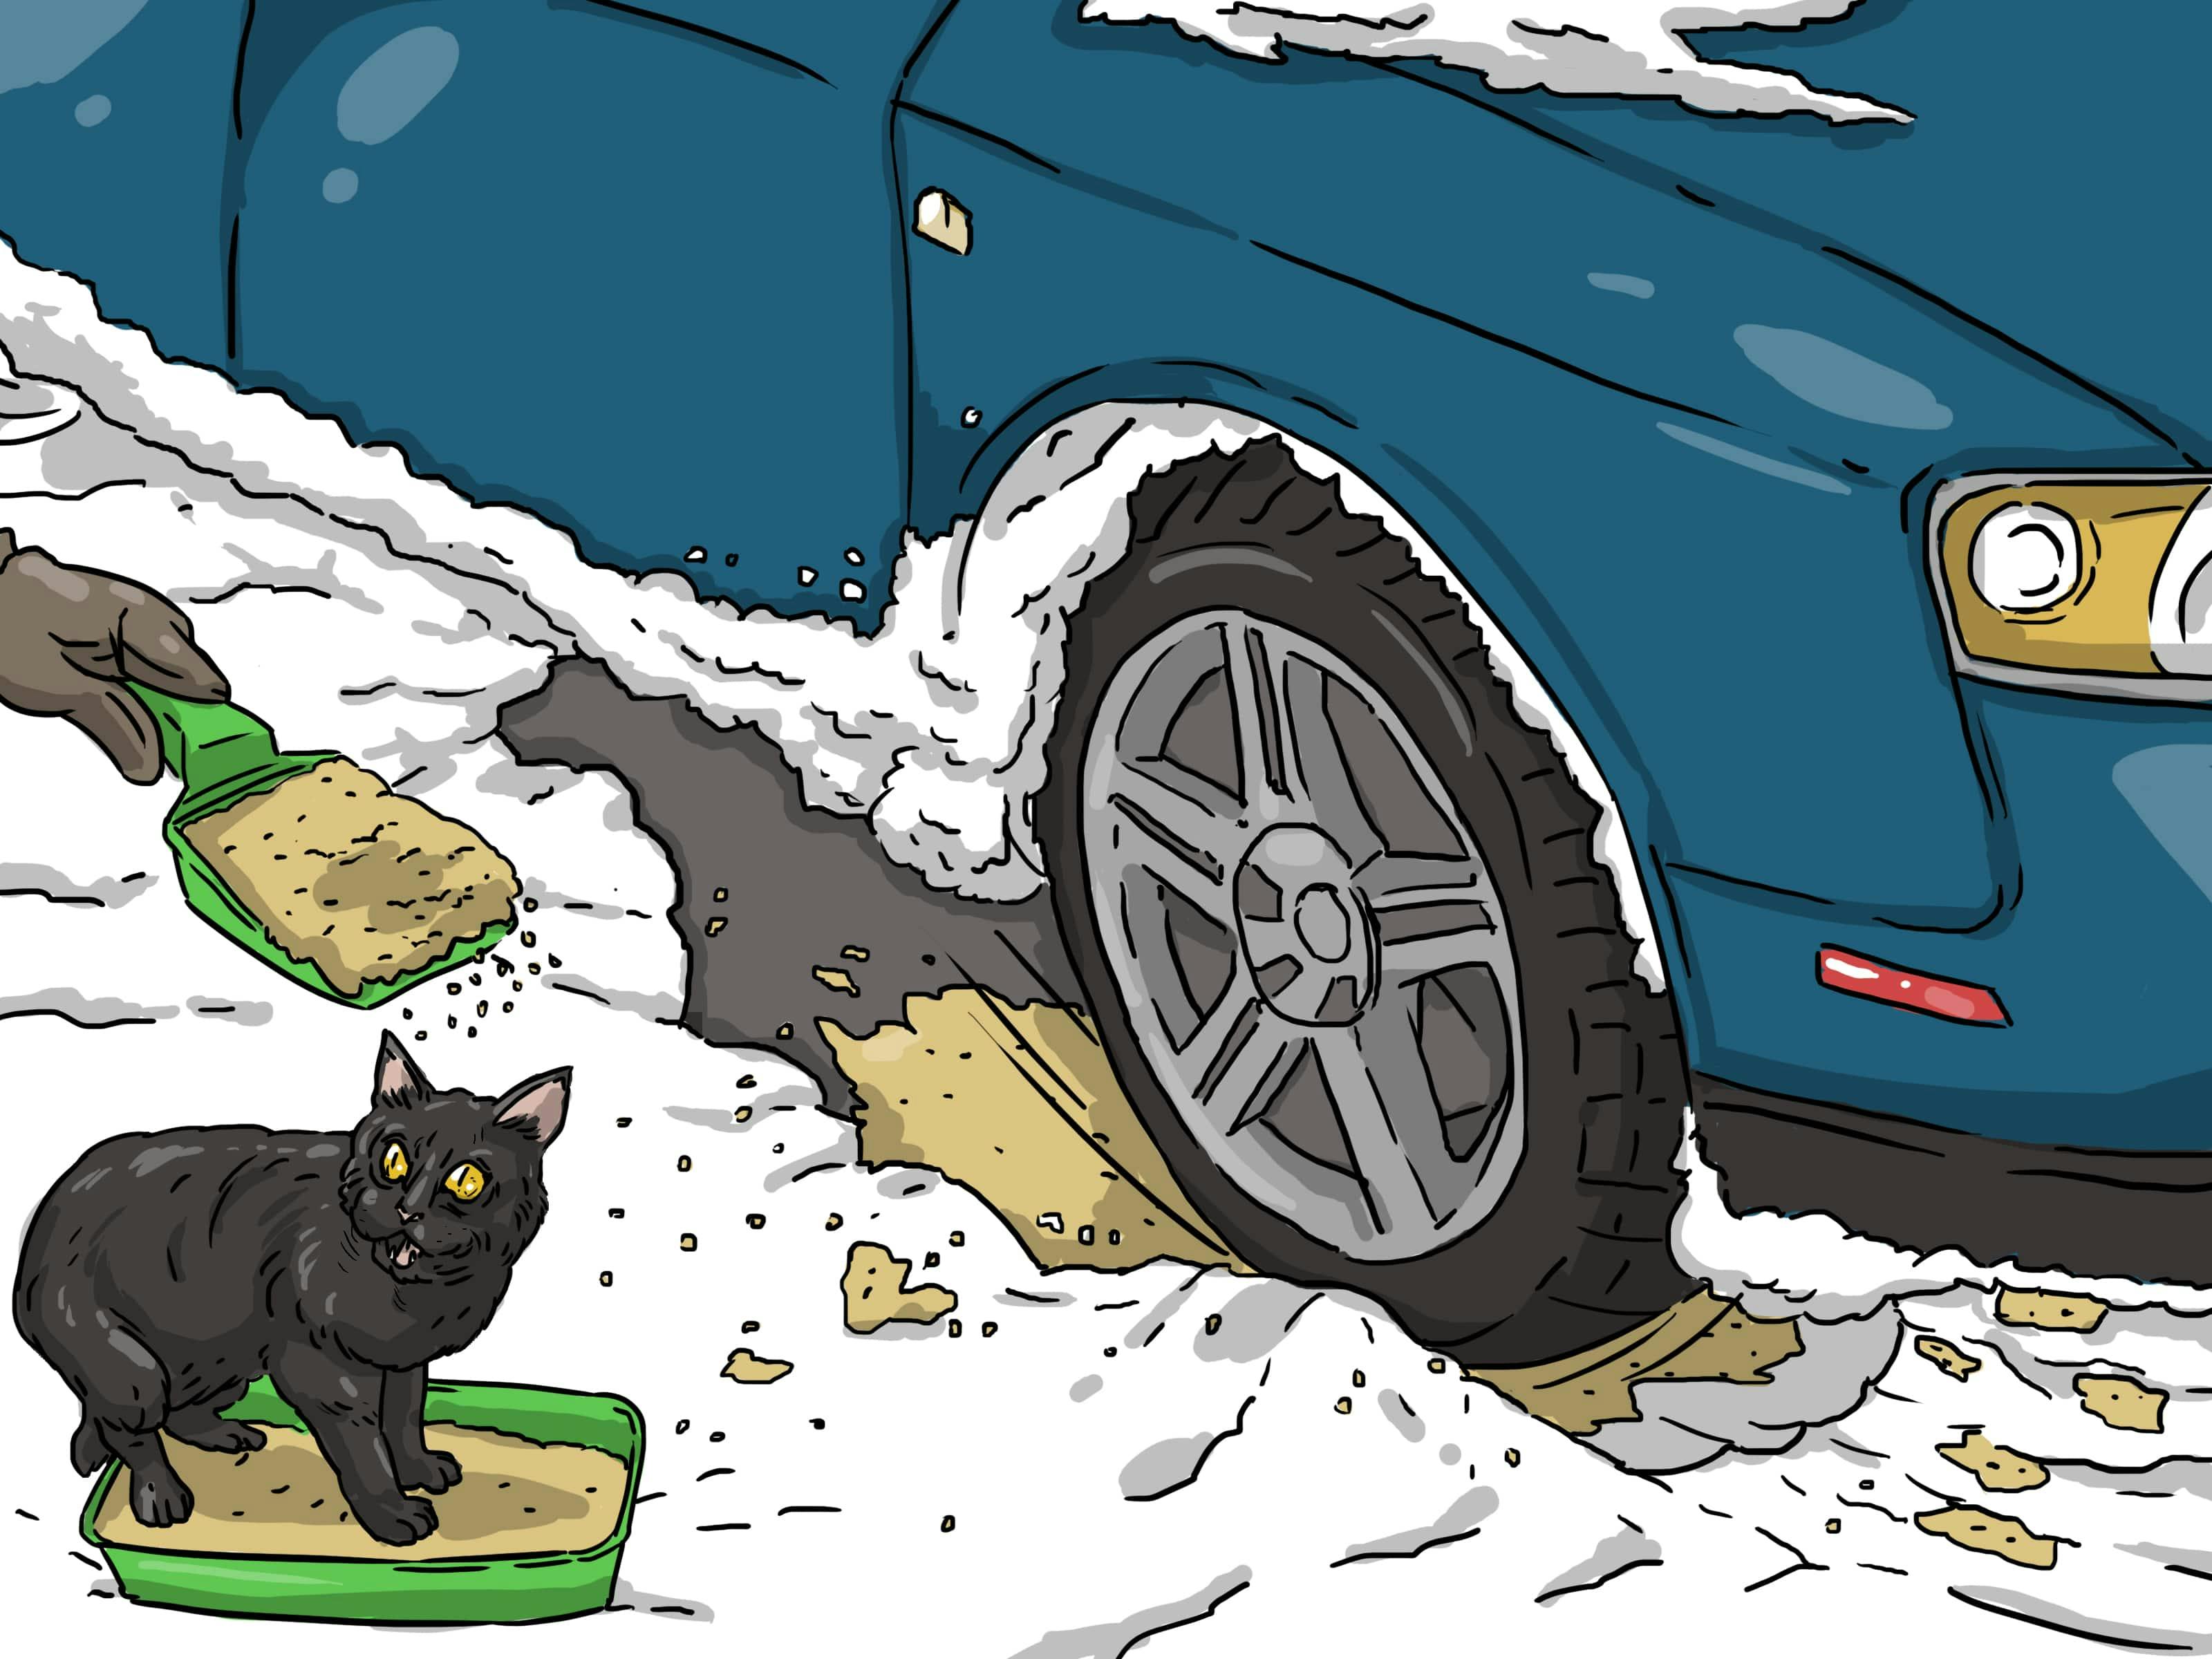 Kitty Litter can come in hand in a pinch if your wheels get stuck in the snow.